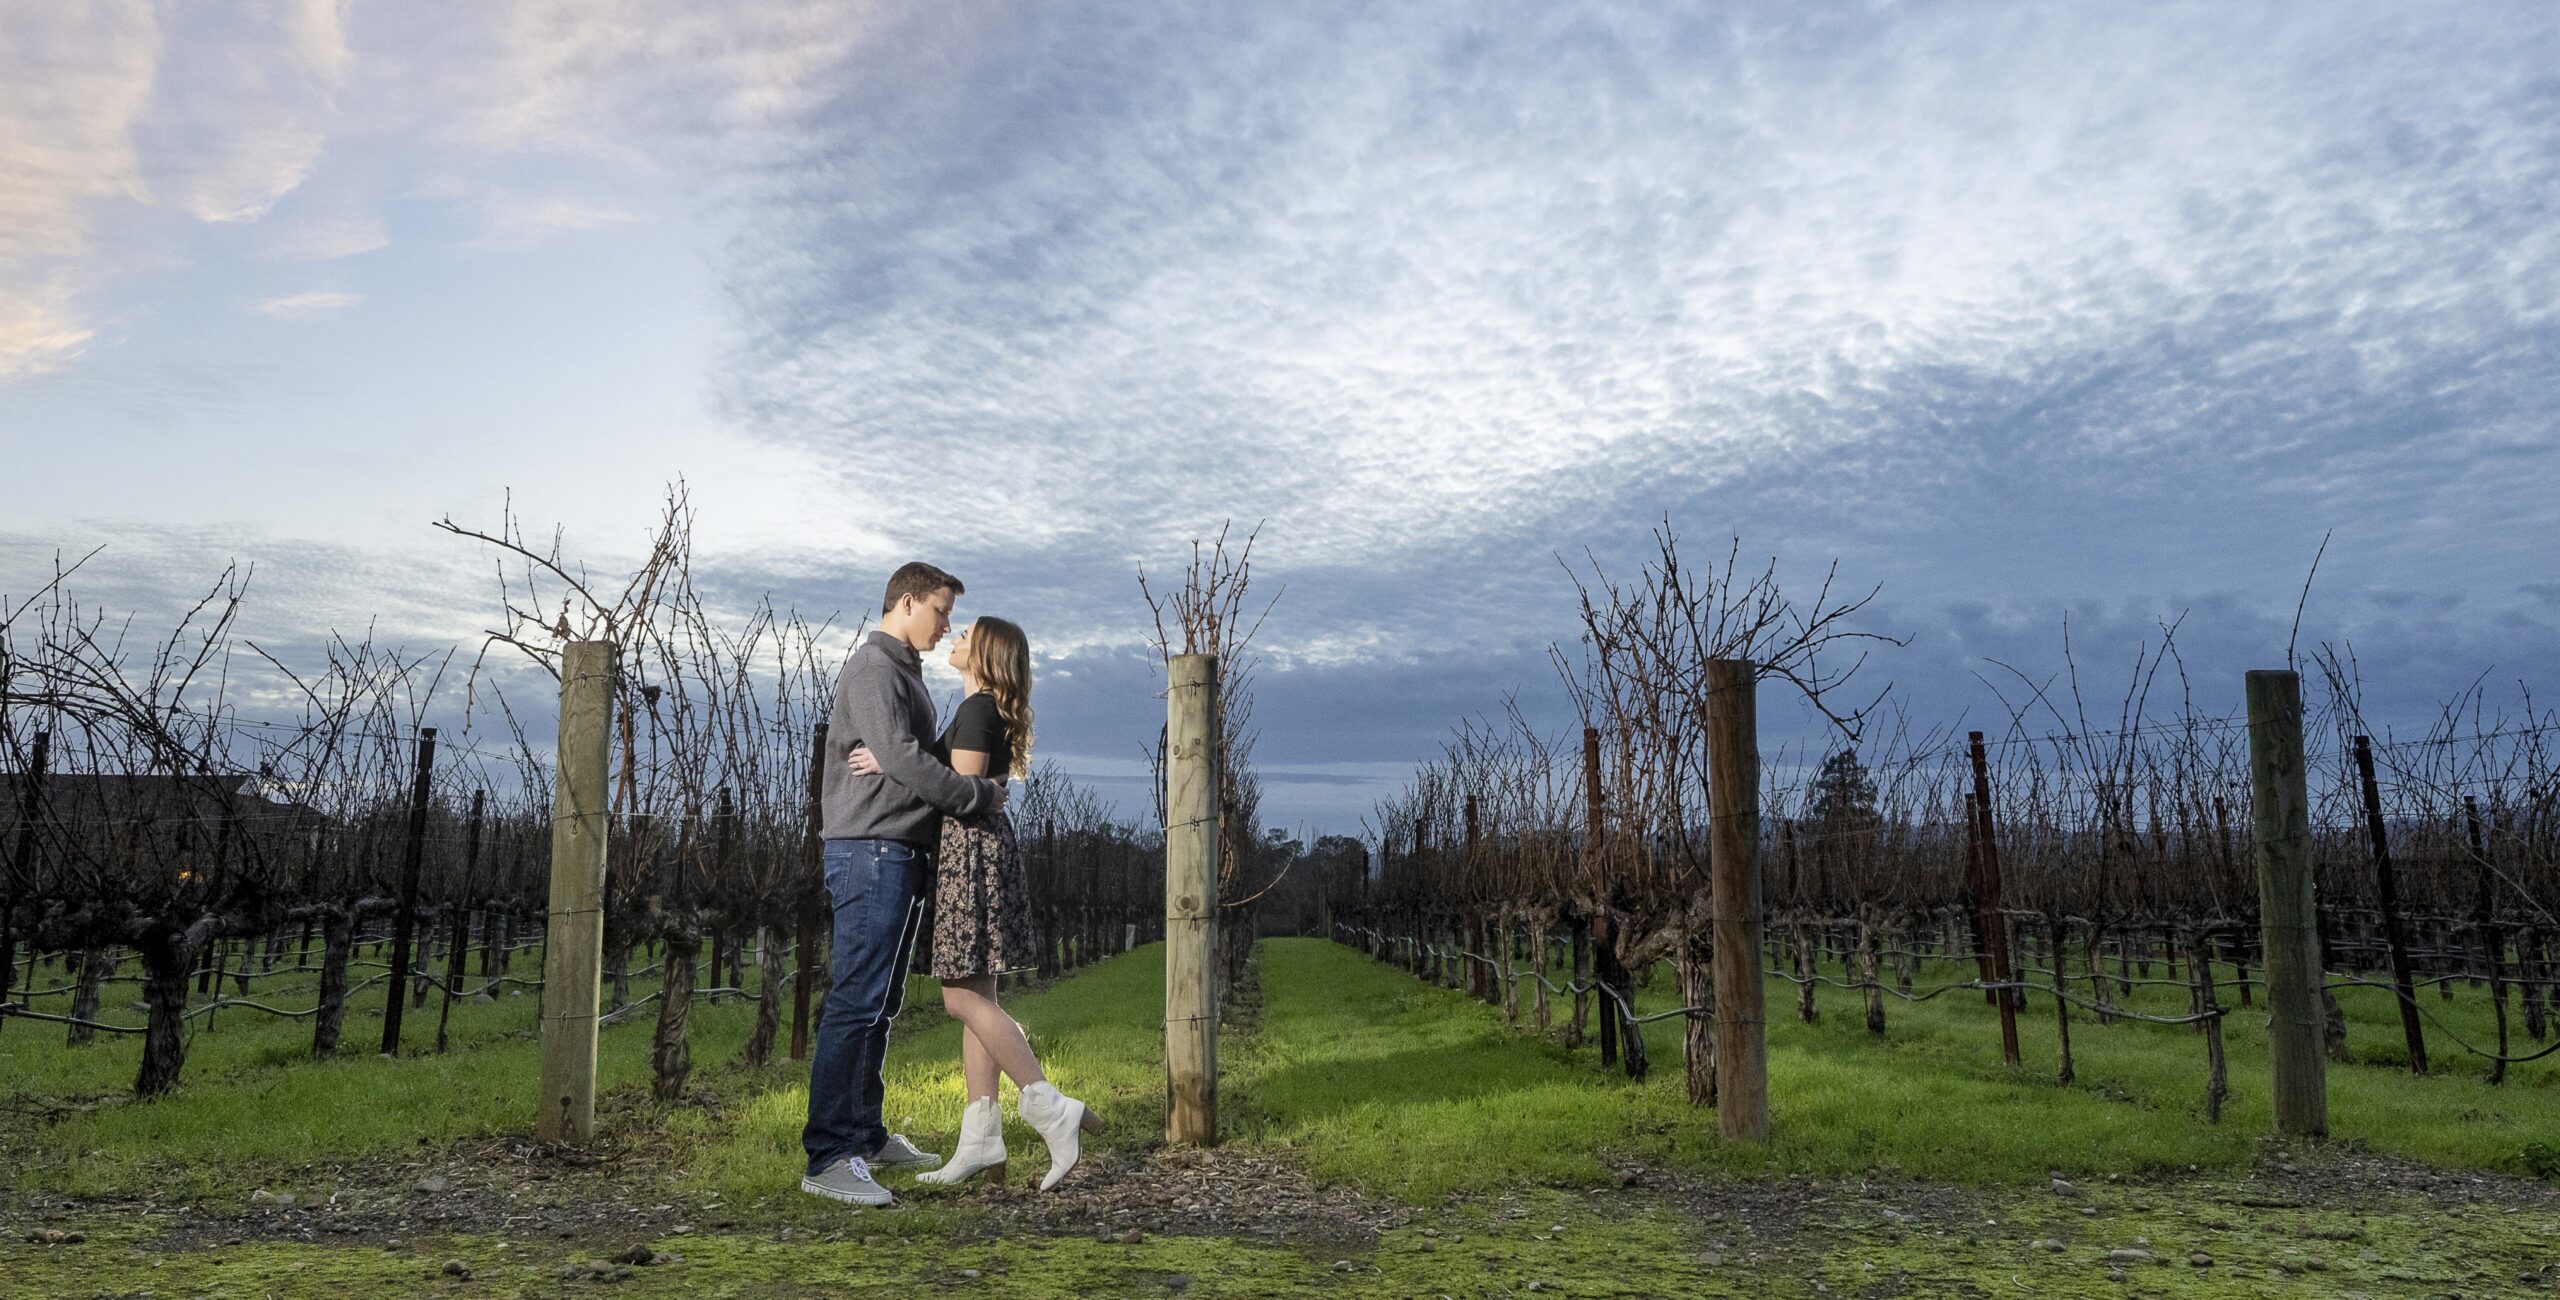 A couple kisses in the middle of a vineyard in california.